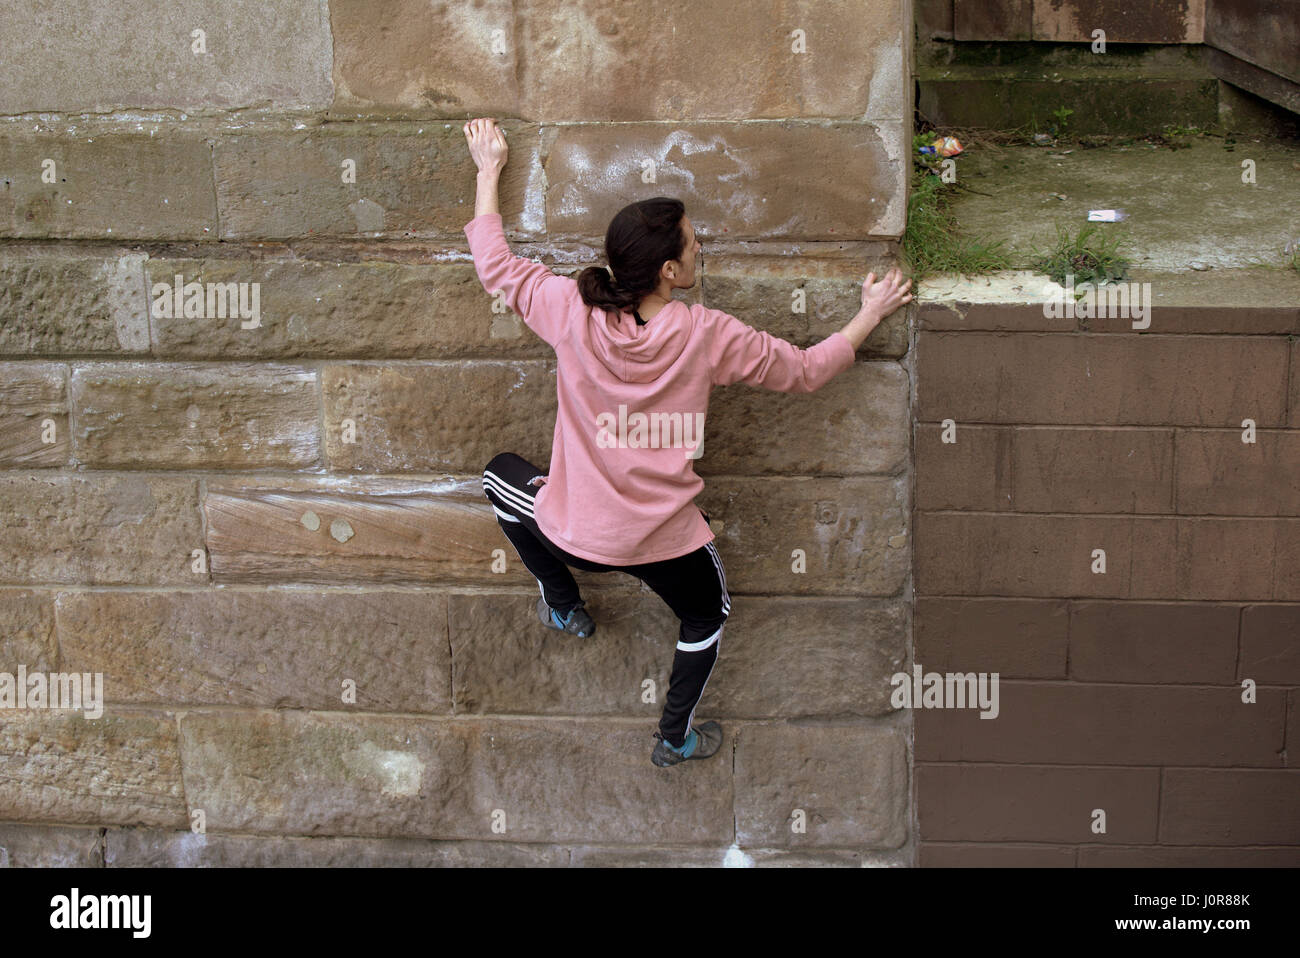 outdoors parkour climbing young people free style Stock Photo